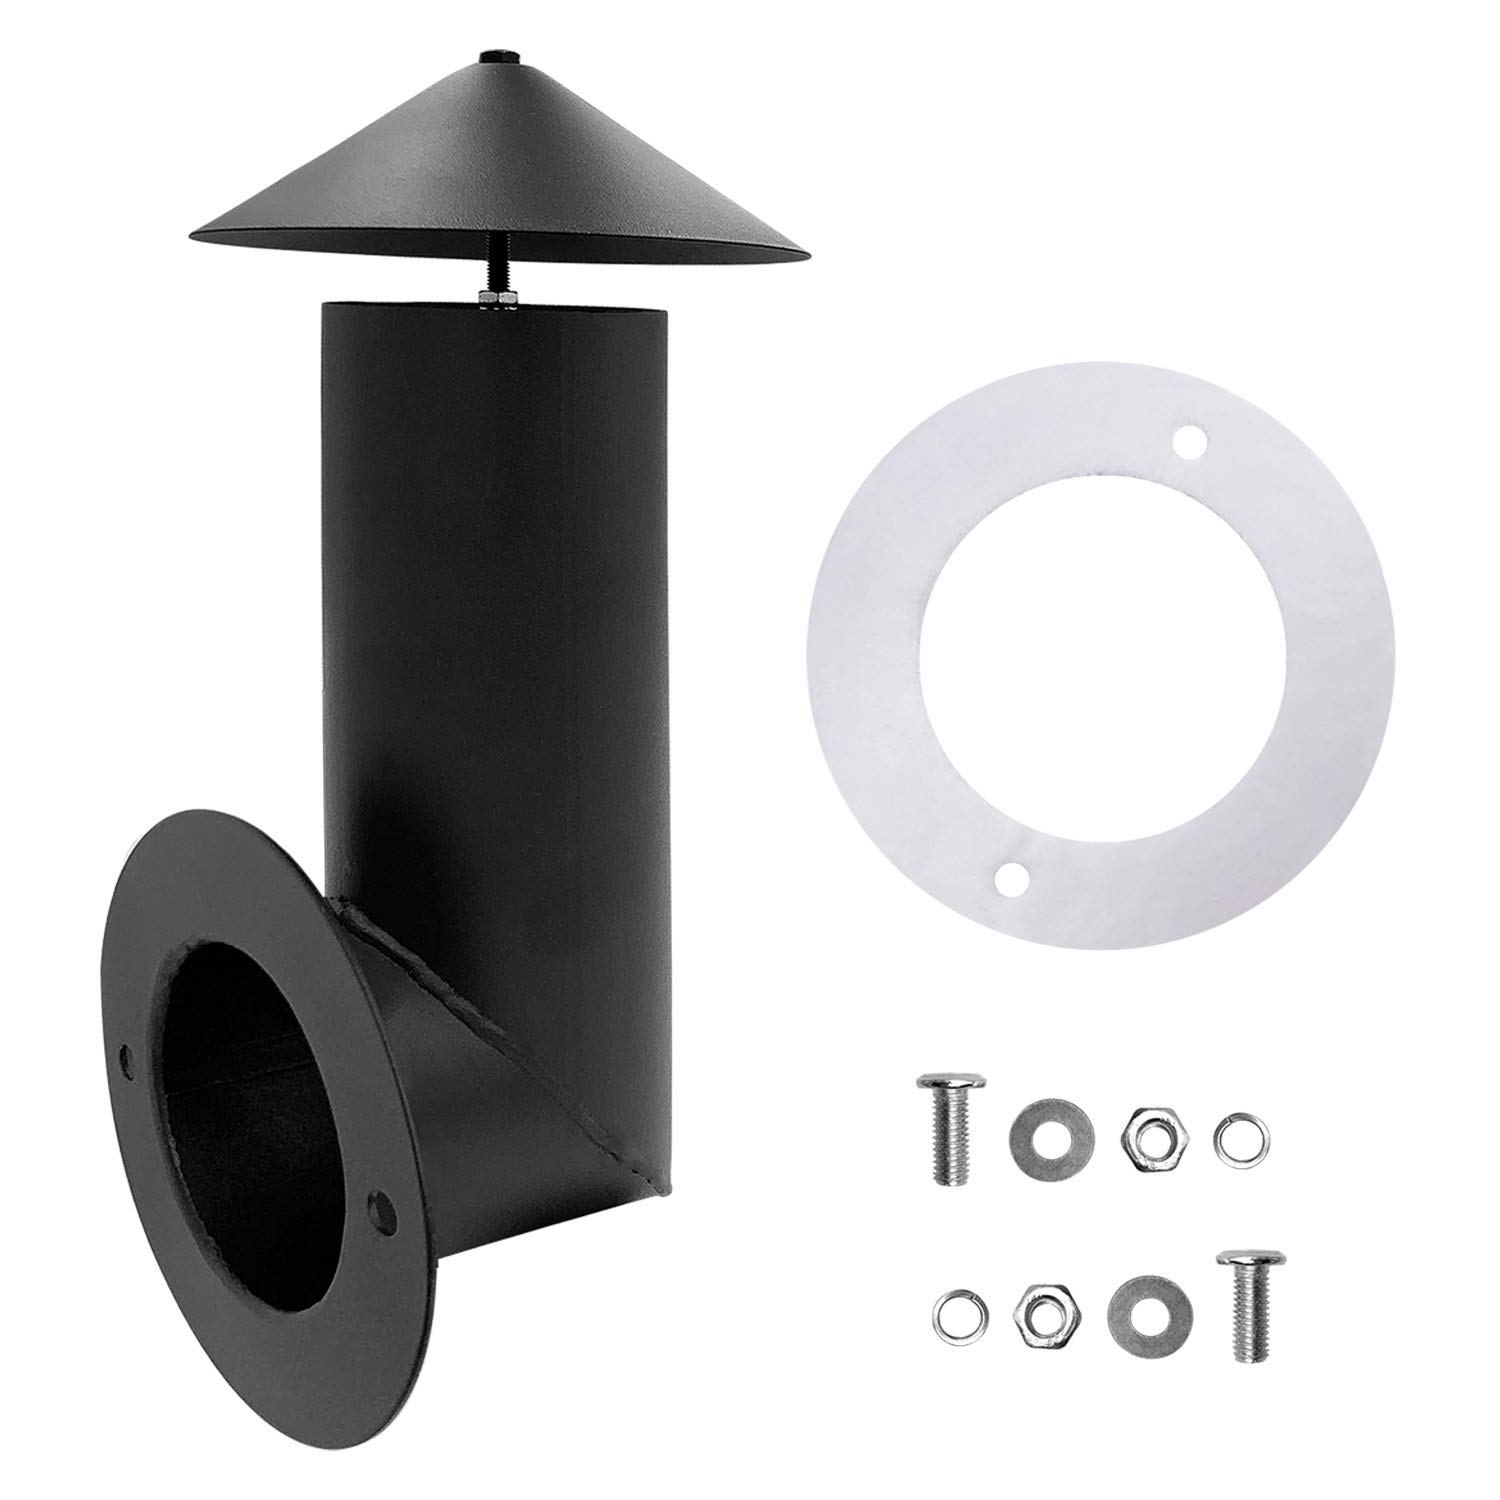 Replacement Stack Chimney Cap Kit for Pit Boss Pellet Grill Smoke Part-YAOAWE